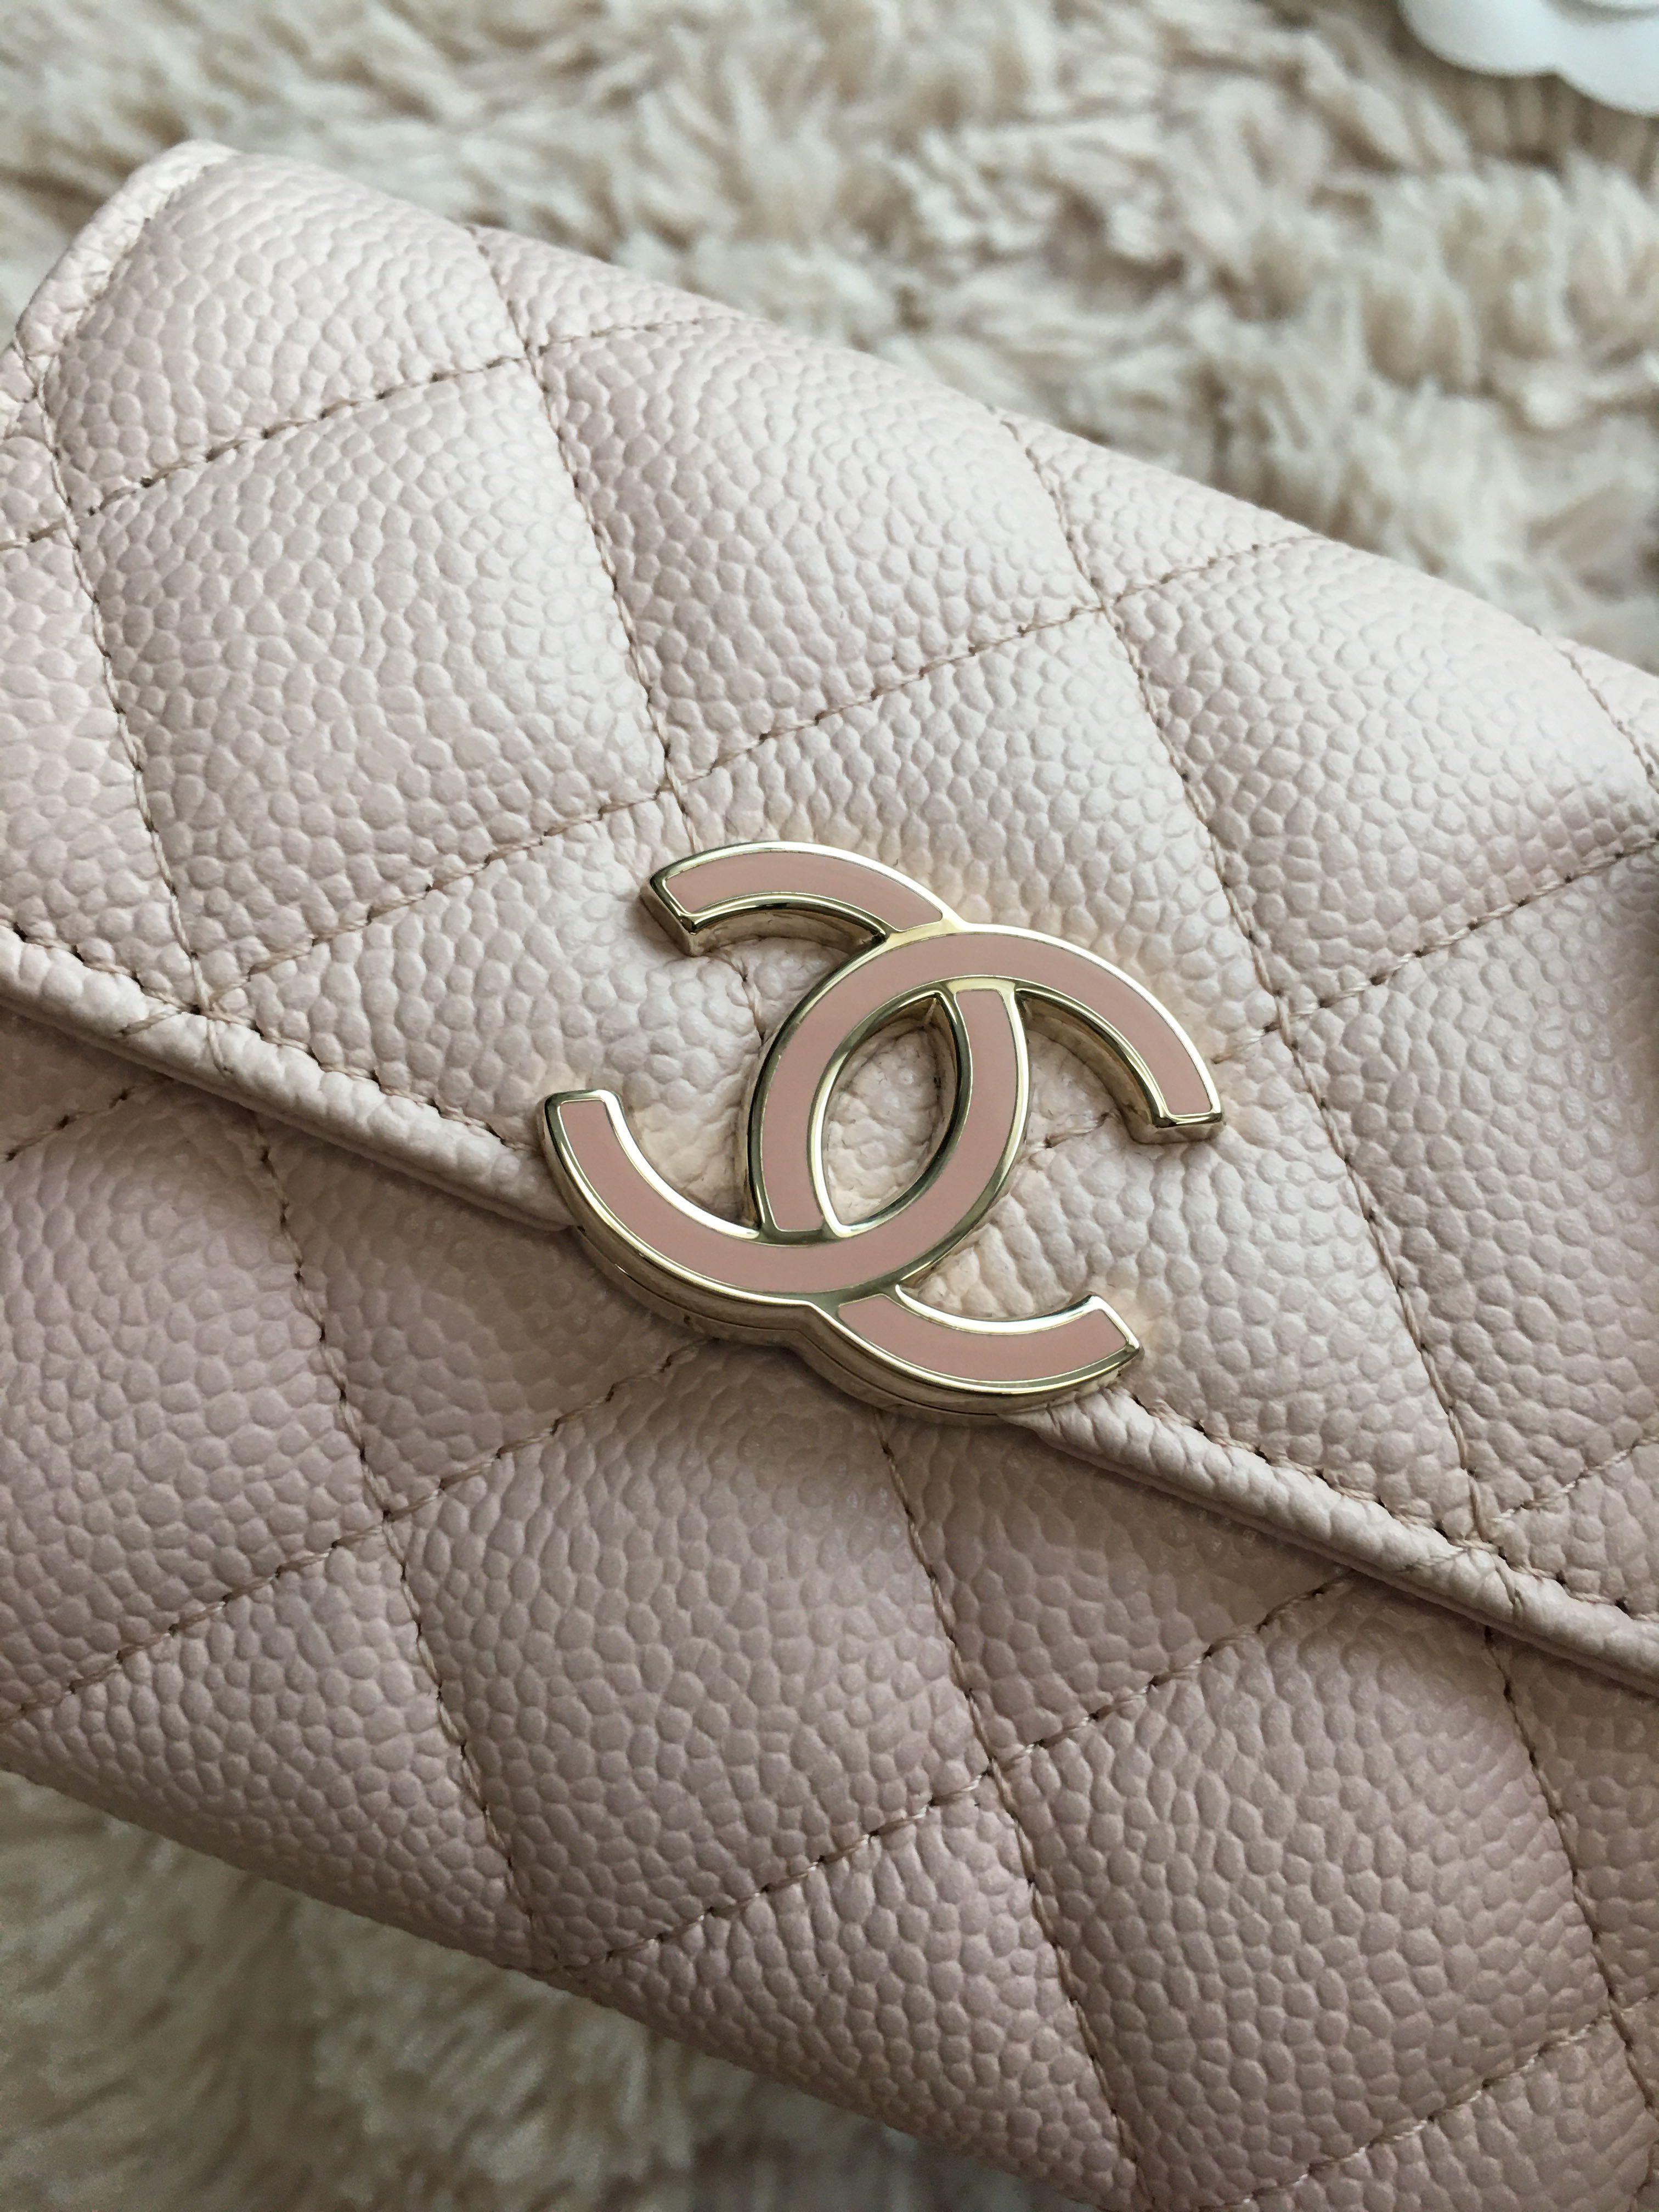 chanel card wallet on chain pink